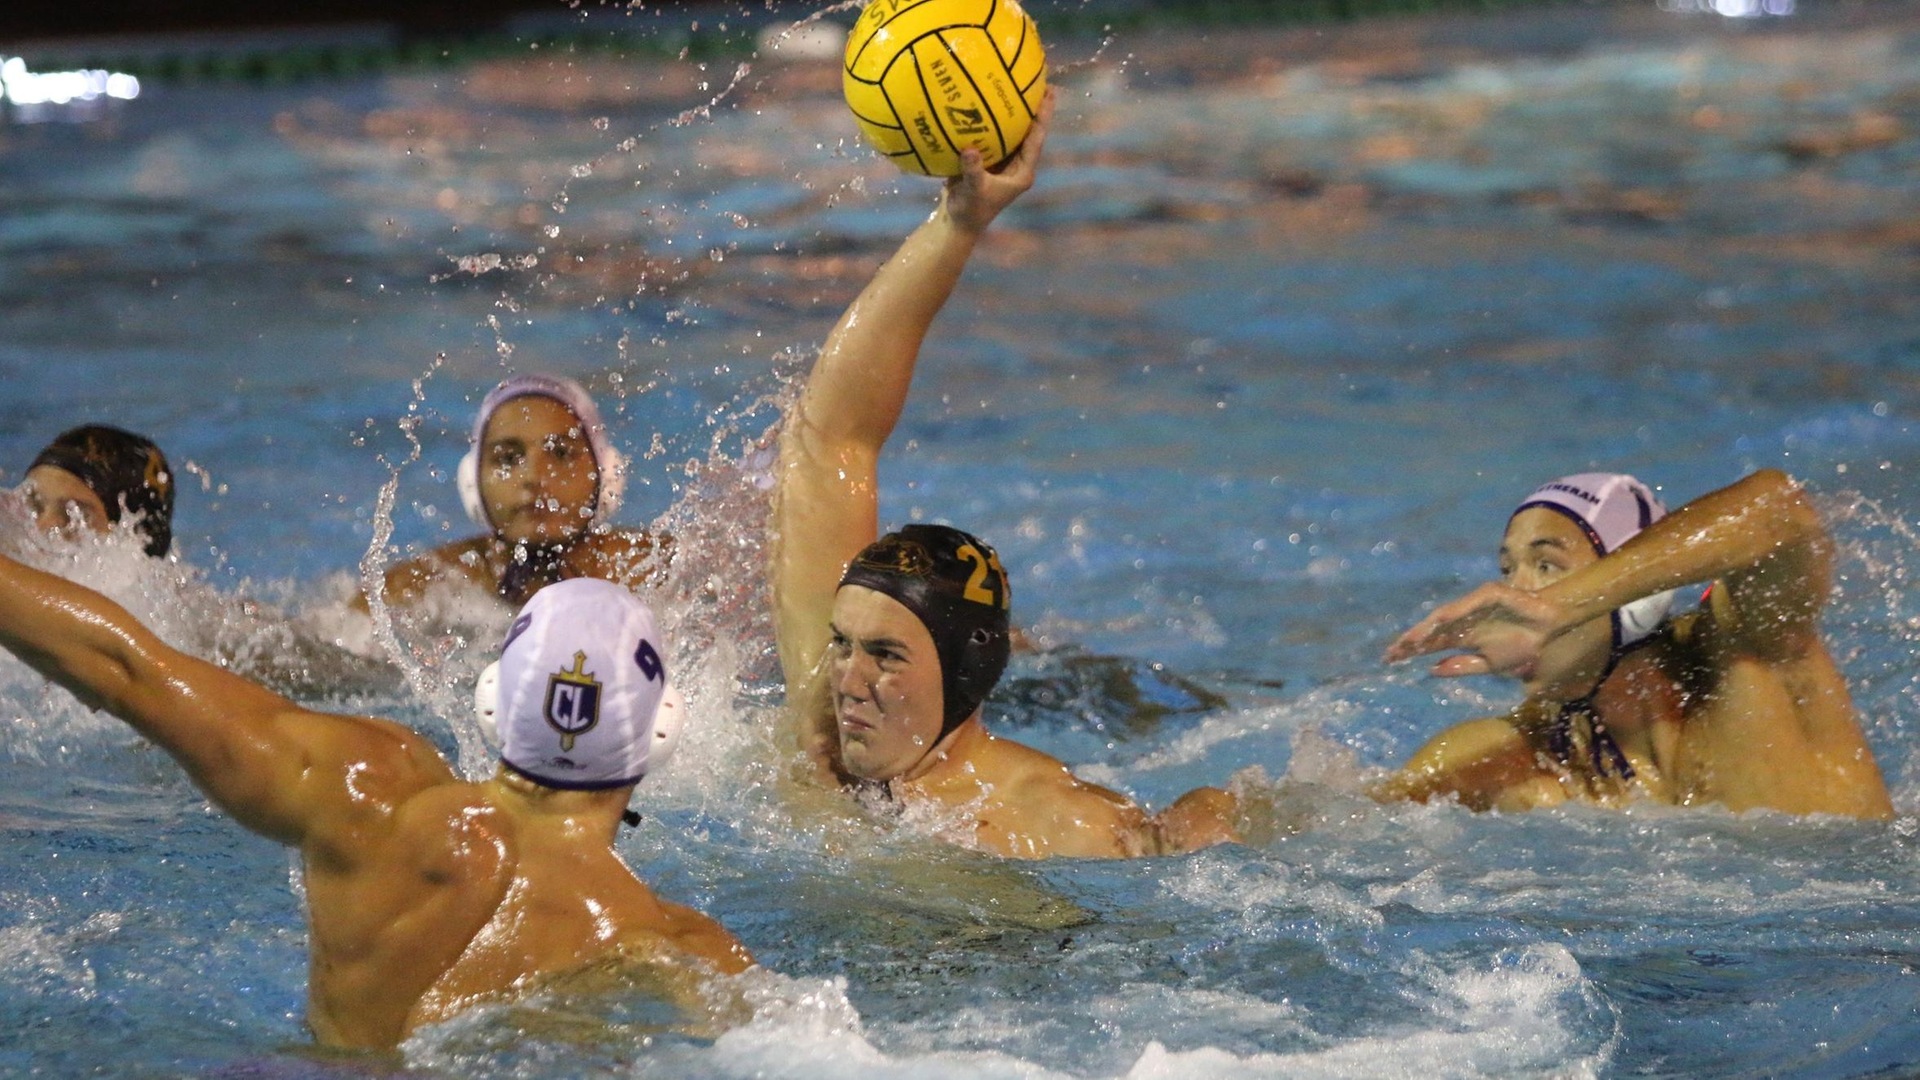 Jeffrey Koretz scores one of his two early goals (photo by Stella Cheng)